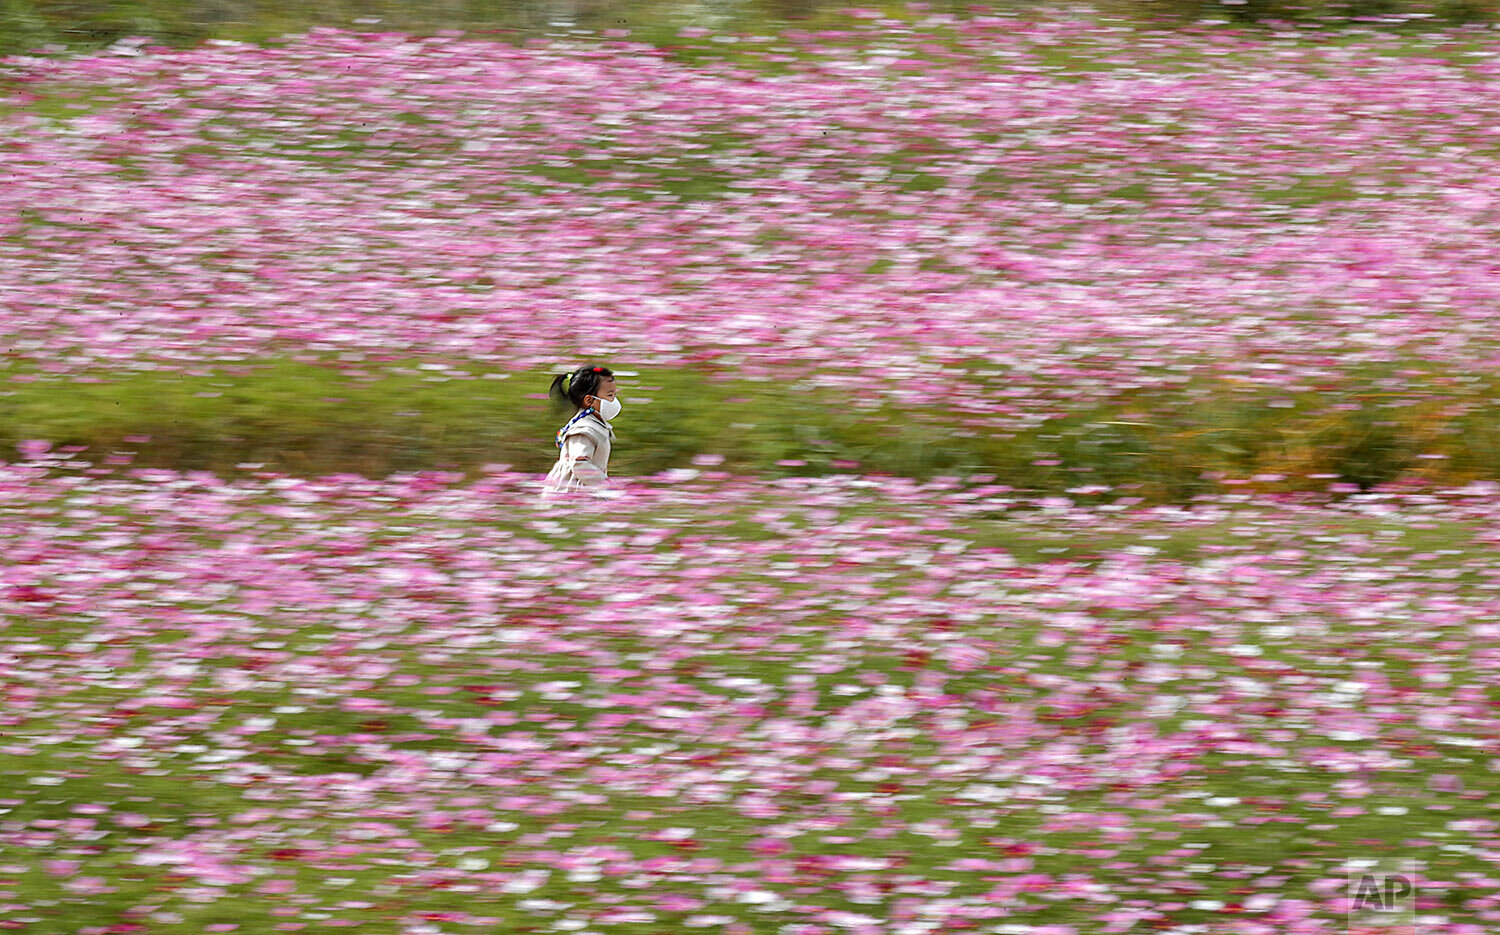  A young visitor wearing a face mask as a precaution against the coronavirus runs through a field of blooming cosmos flowers in Paju, South Korea, Wednesday, Oct. 14, 2020. (AP Photo/Lee Jin-man) 